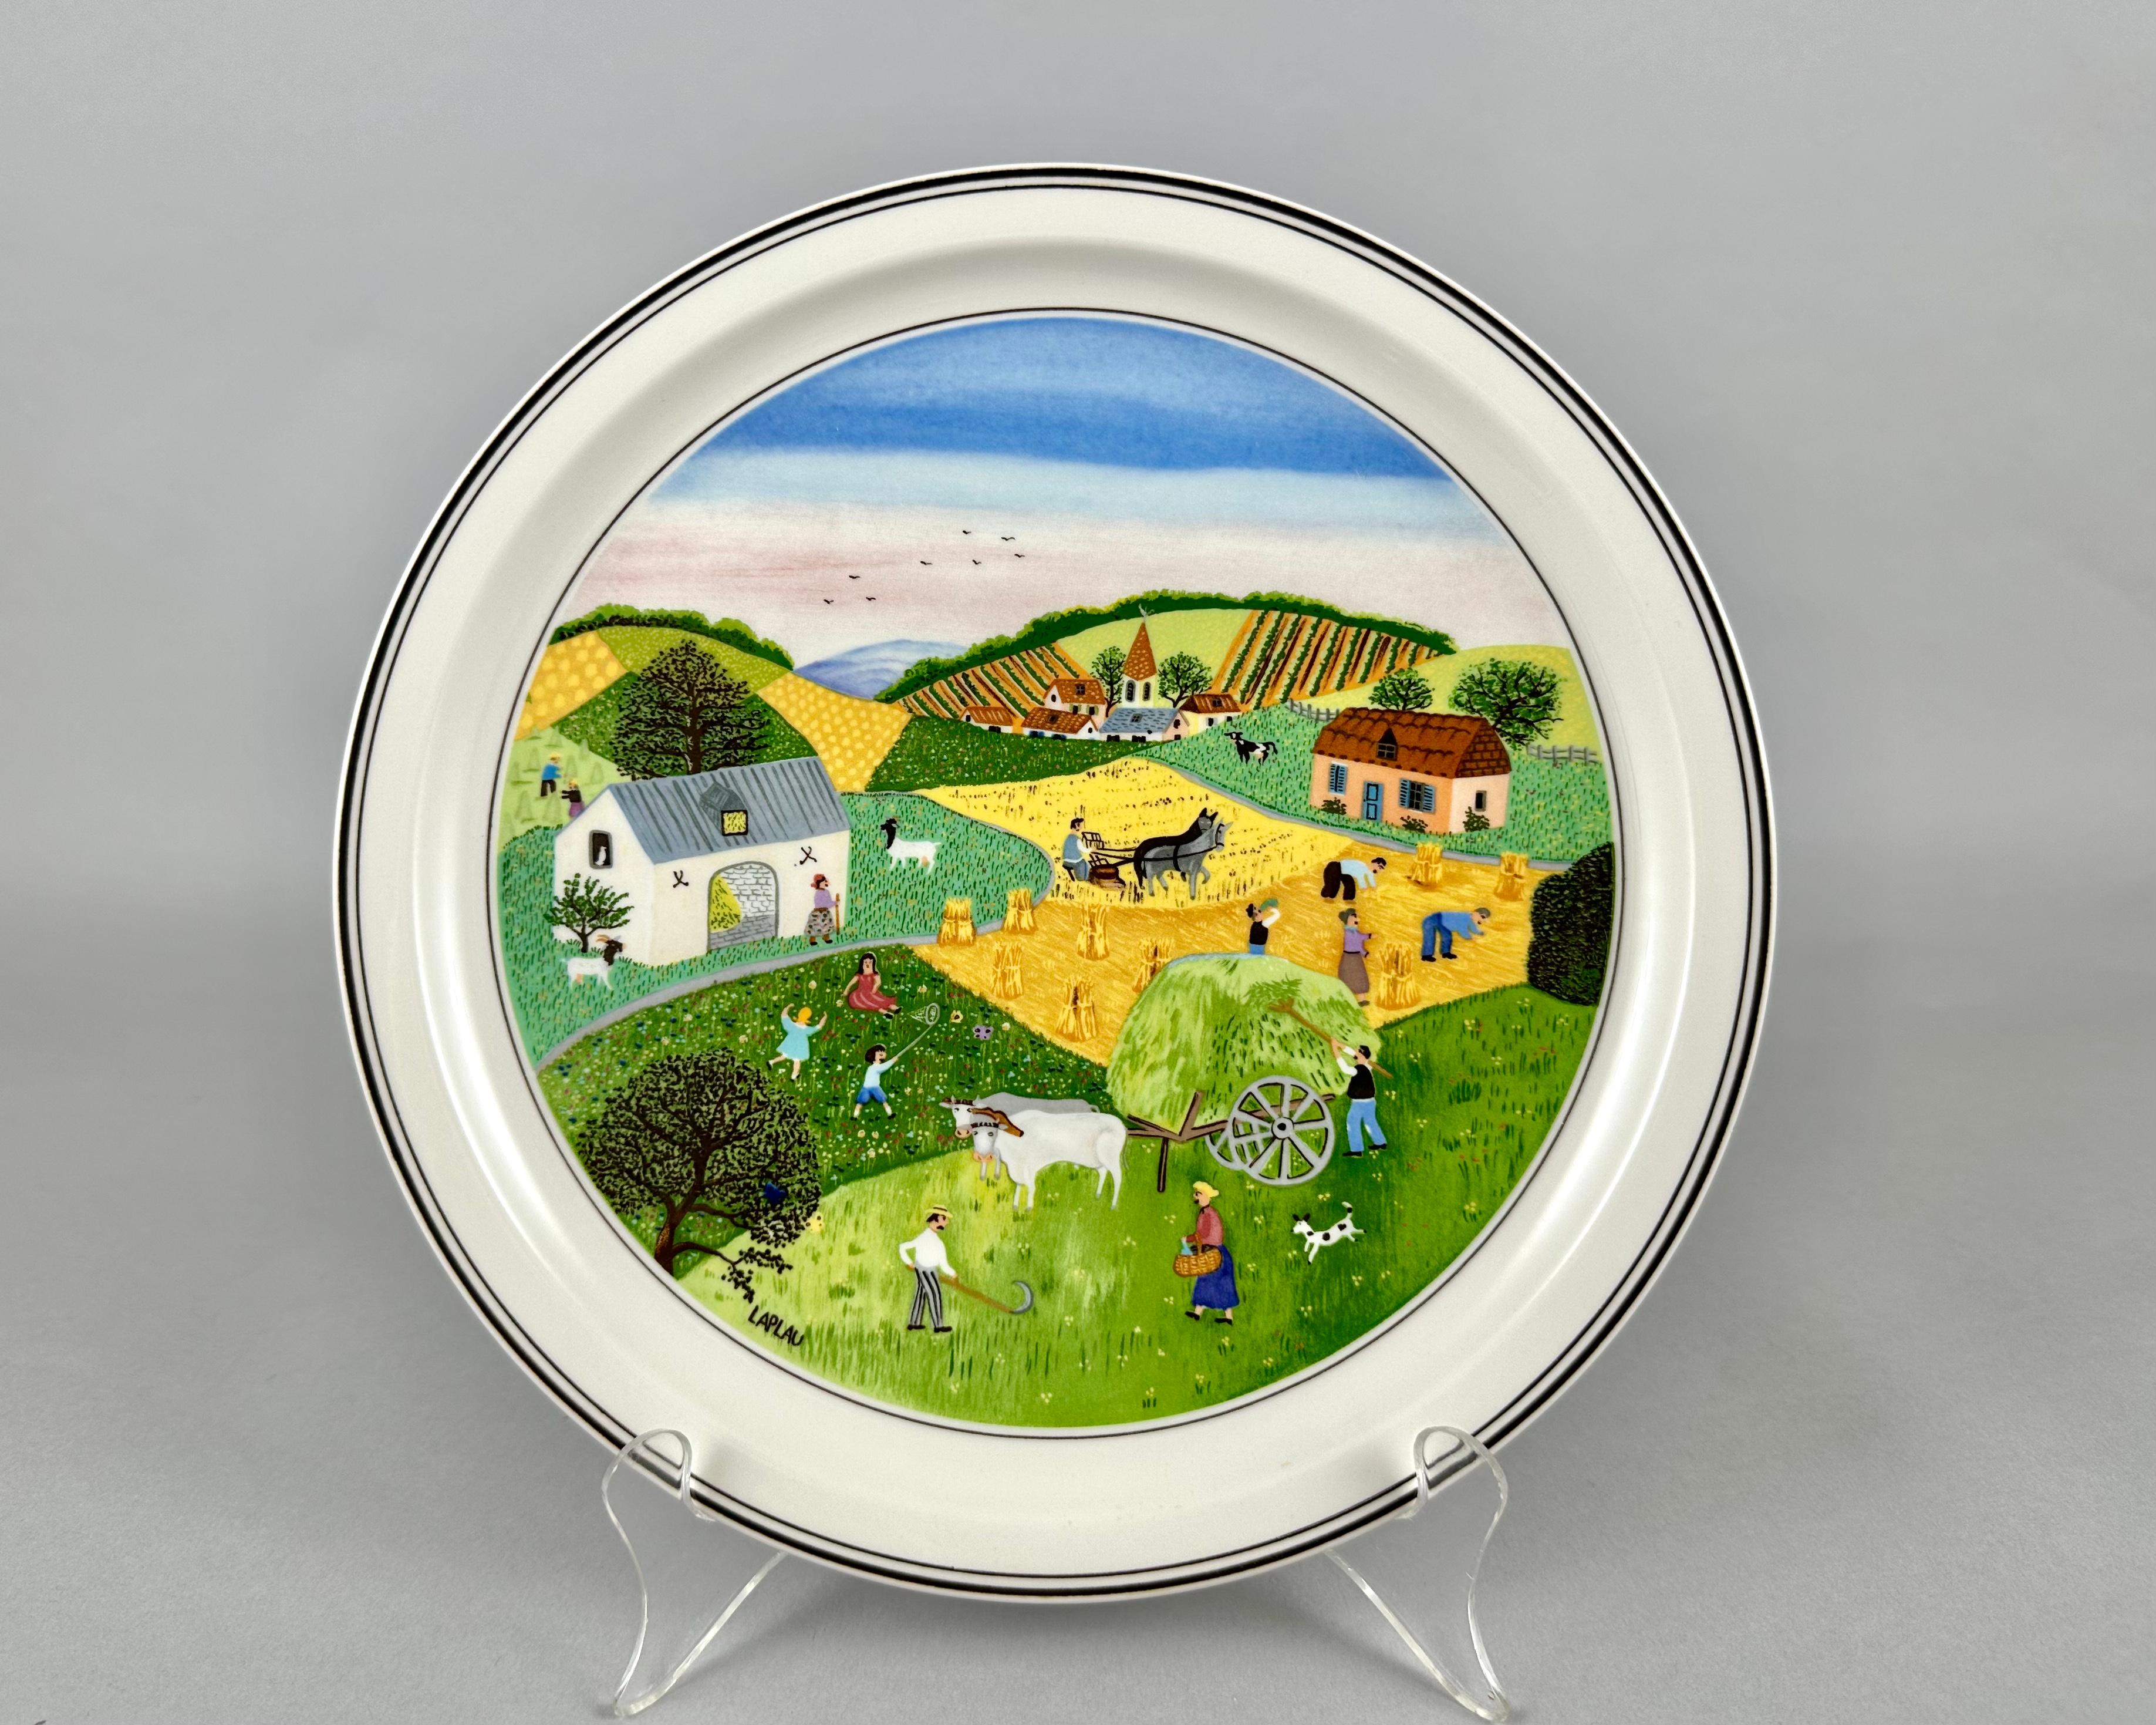 The four collectable plates made by the renowned porcelain manufacturer, Villeroy & Boch.

The Four Seasons Design by Gerard Laplau.

Luxembourg, 1980s.

These plates were commissioned from the French artist Gerard Laplau using the 'niaf' or naive